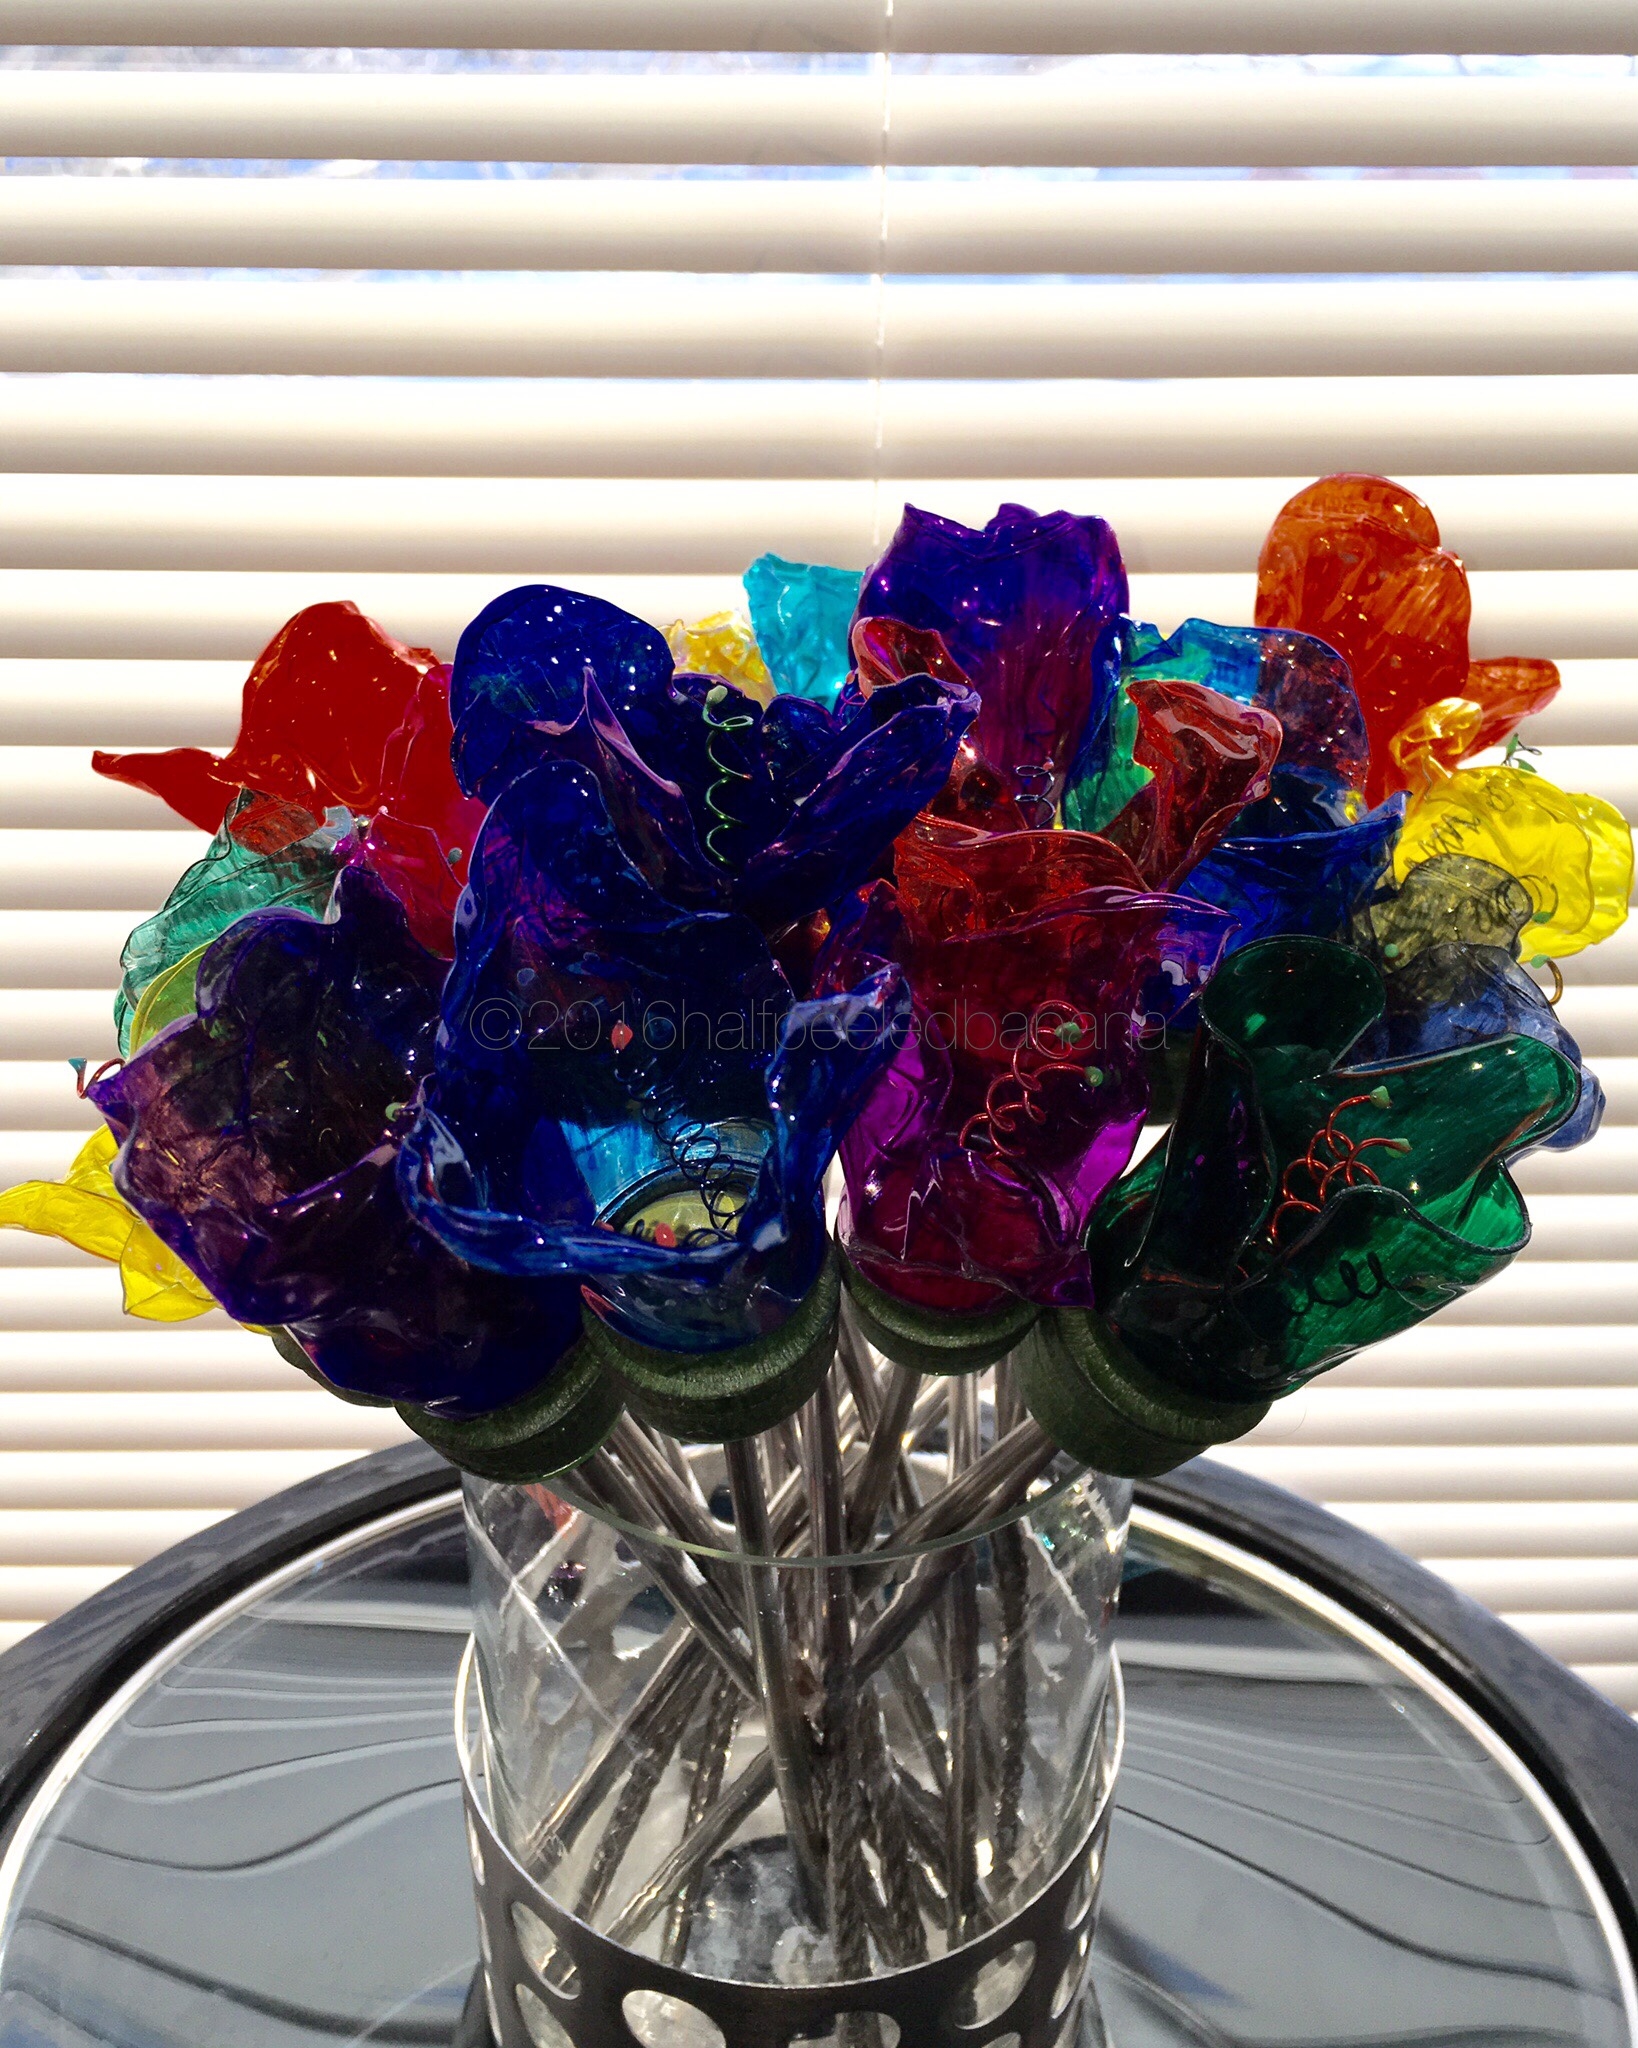 from my home to your home! upcycled water bottle flowers with silver stems!